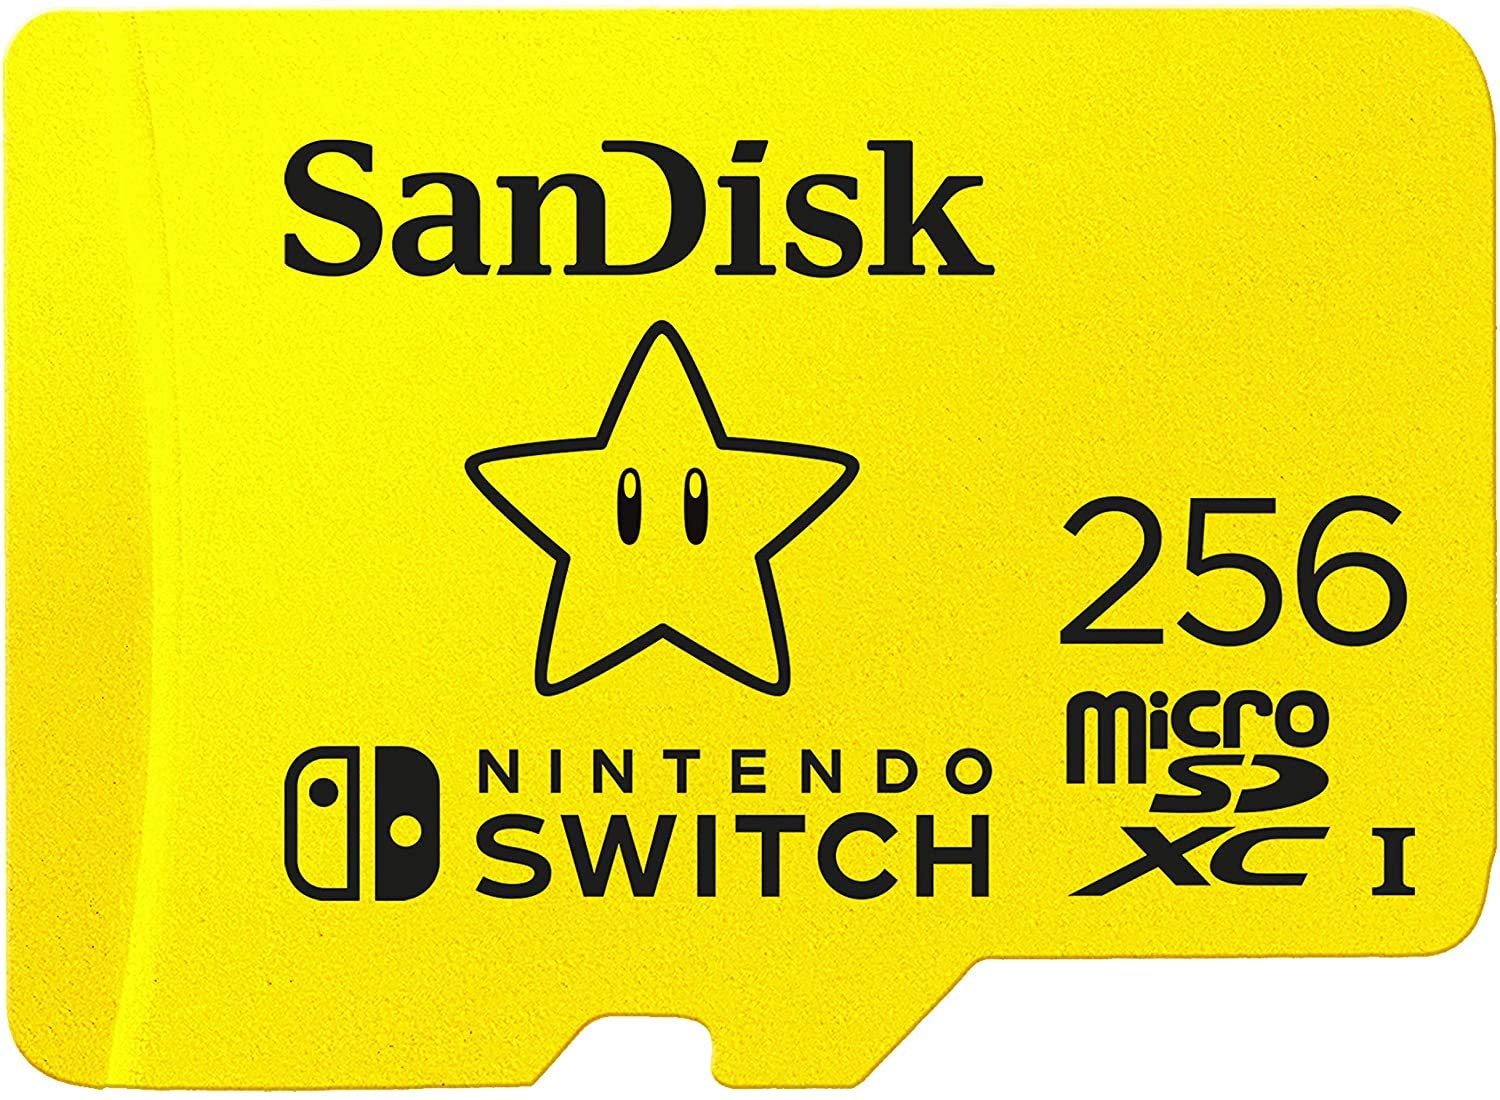 SanDisk Nintendo Switch MicroSD 256GB Memory Card (2 Pack) for Nintendo Switch OLED Model (SDSQXAO-256G-GNCZN) U3, Class 10, 4K UHD Bundle with (1) Everything But Stromboli MicroSDXC & SD Card Reader